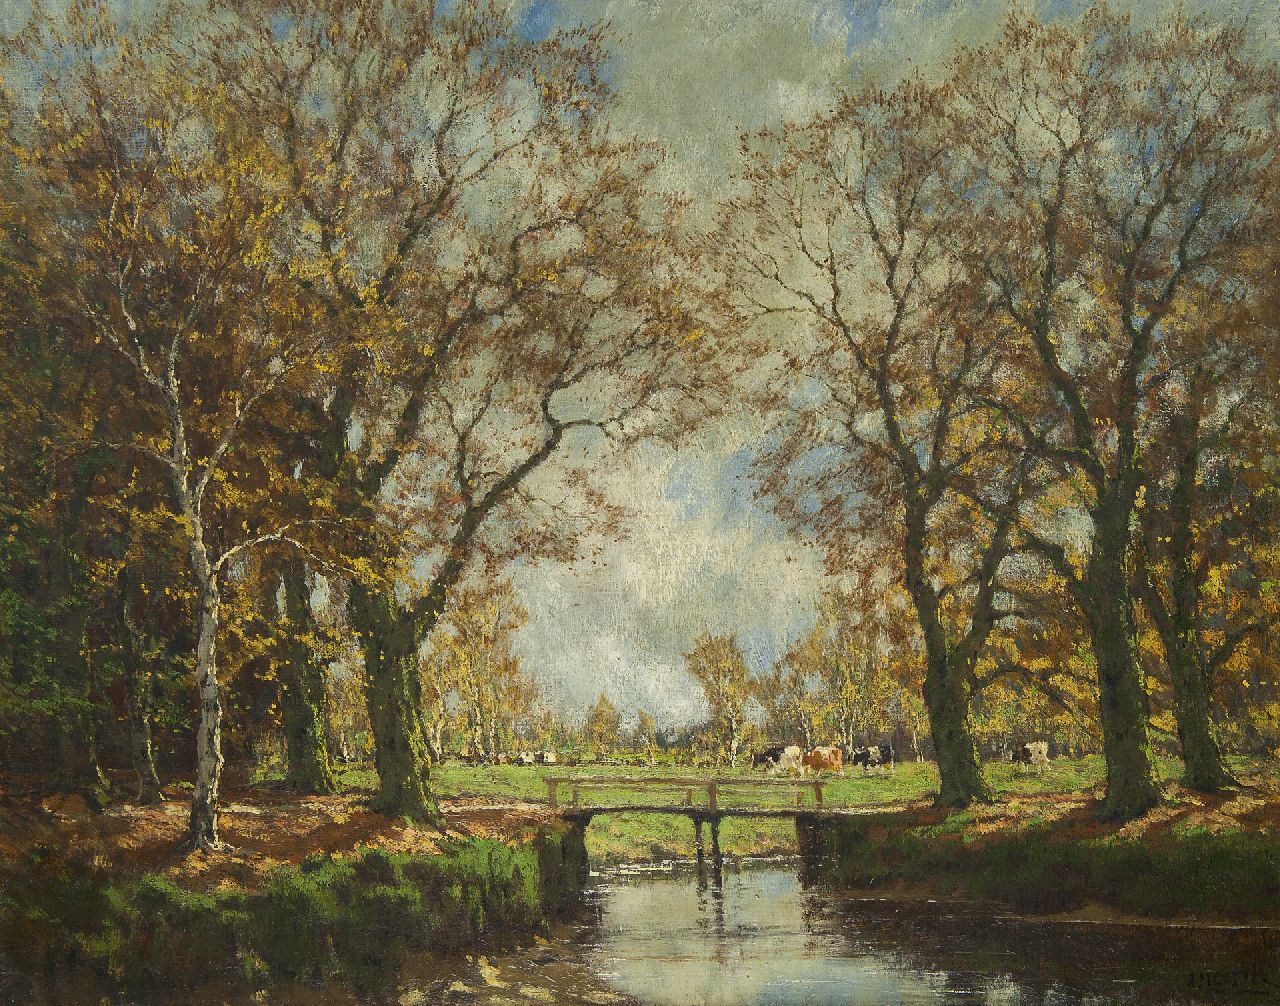 Gorter A.M.  | 'Arnold' Marc Gorter | Paintings offered for sale | Landscape with brook and cattle, oil on canvas 62.3 x 79.1 cm, signed l.r.